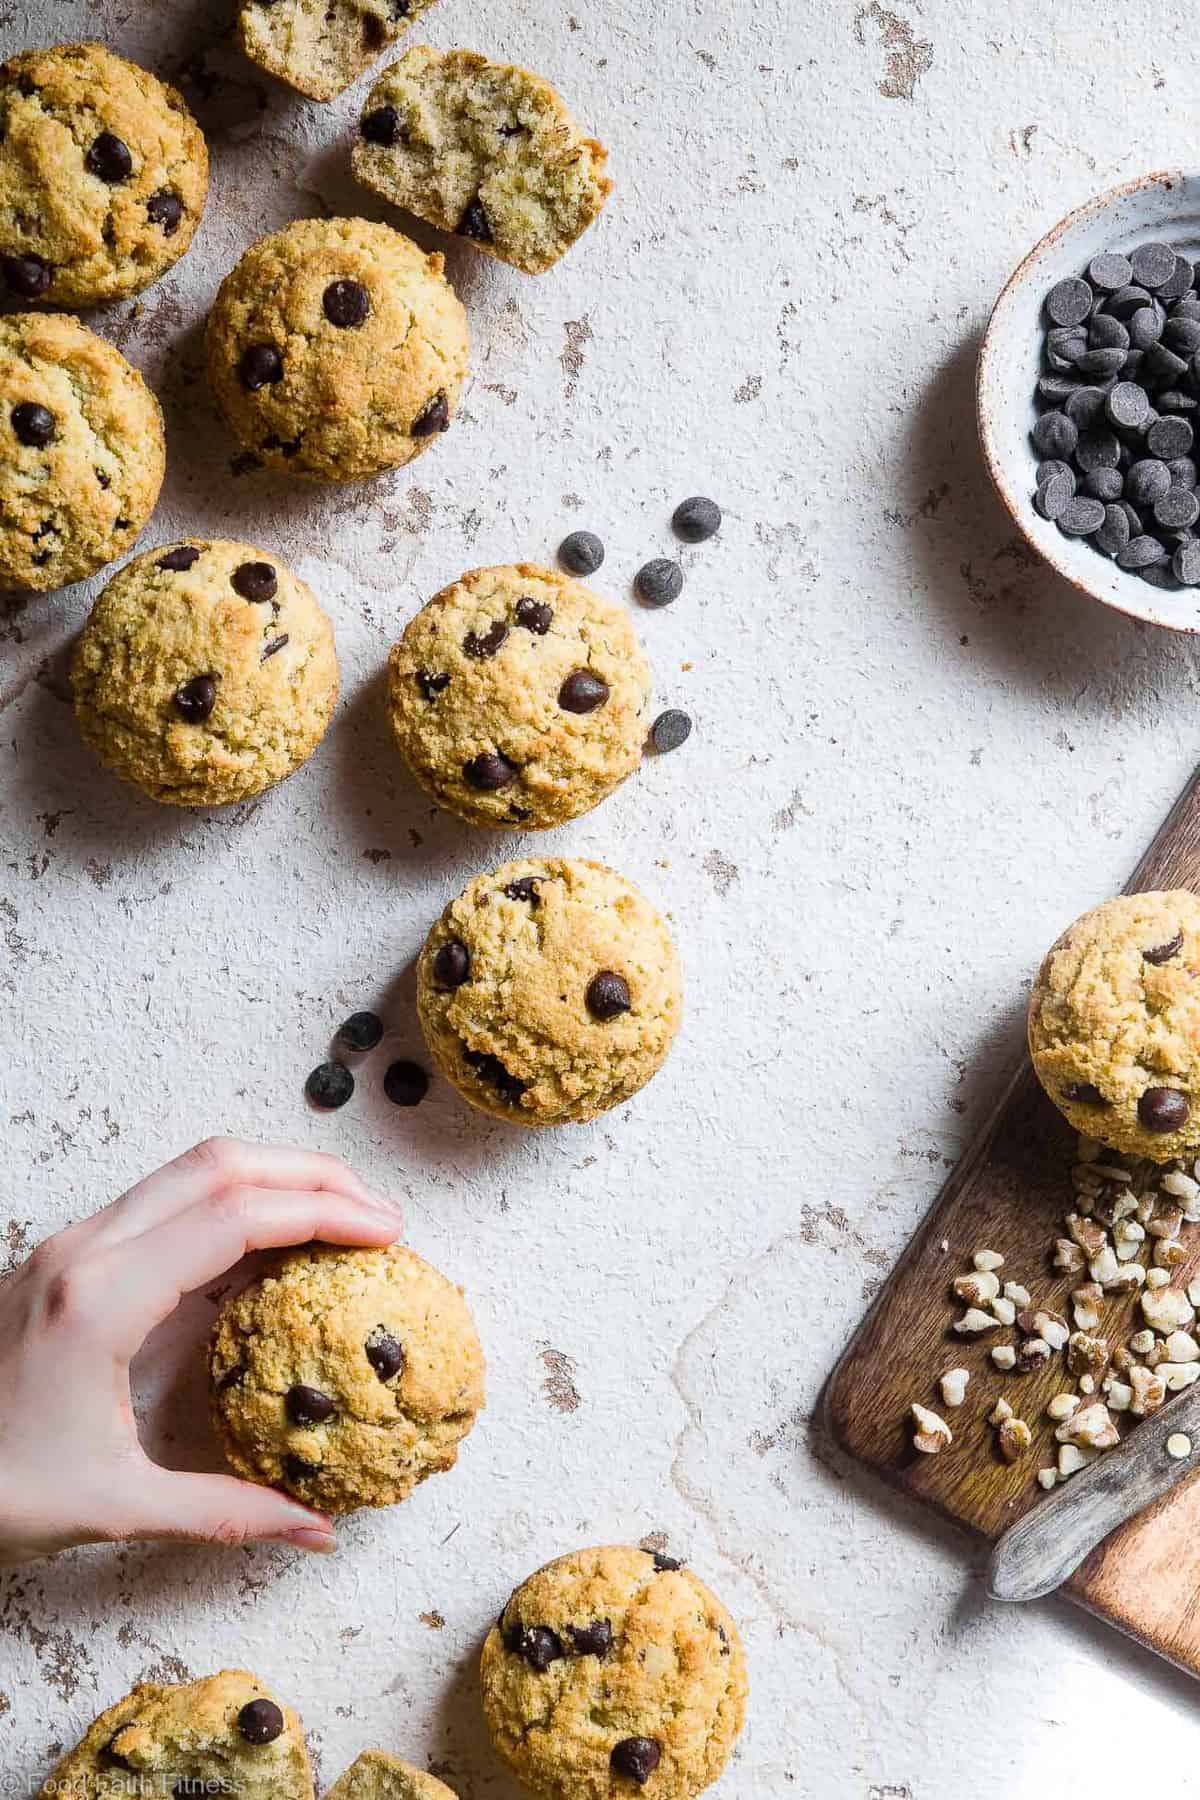 Walnut Chocolate Chip Keto Low Carb Muffins - These healthy, sugar free muffins are loaded with chocolate chips and black walnuts and are SO moist and fluffy you won't believe they're gluten free, keto AND paleo! | #Foodfaithfitness | 